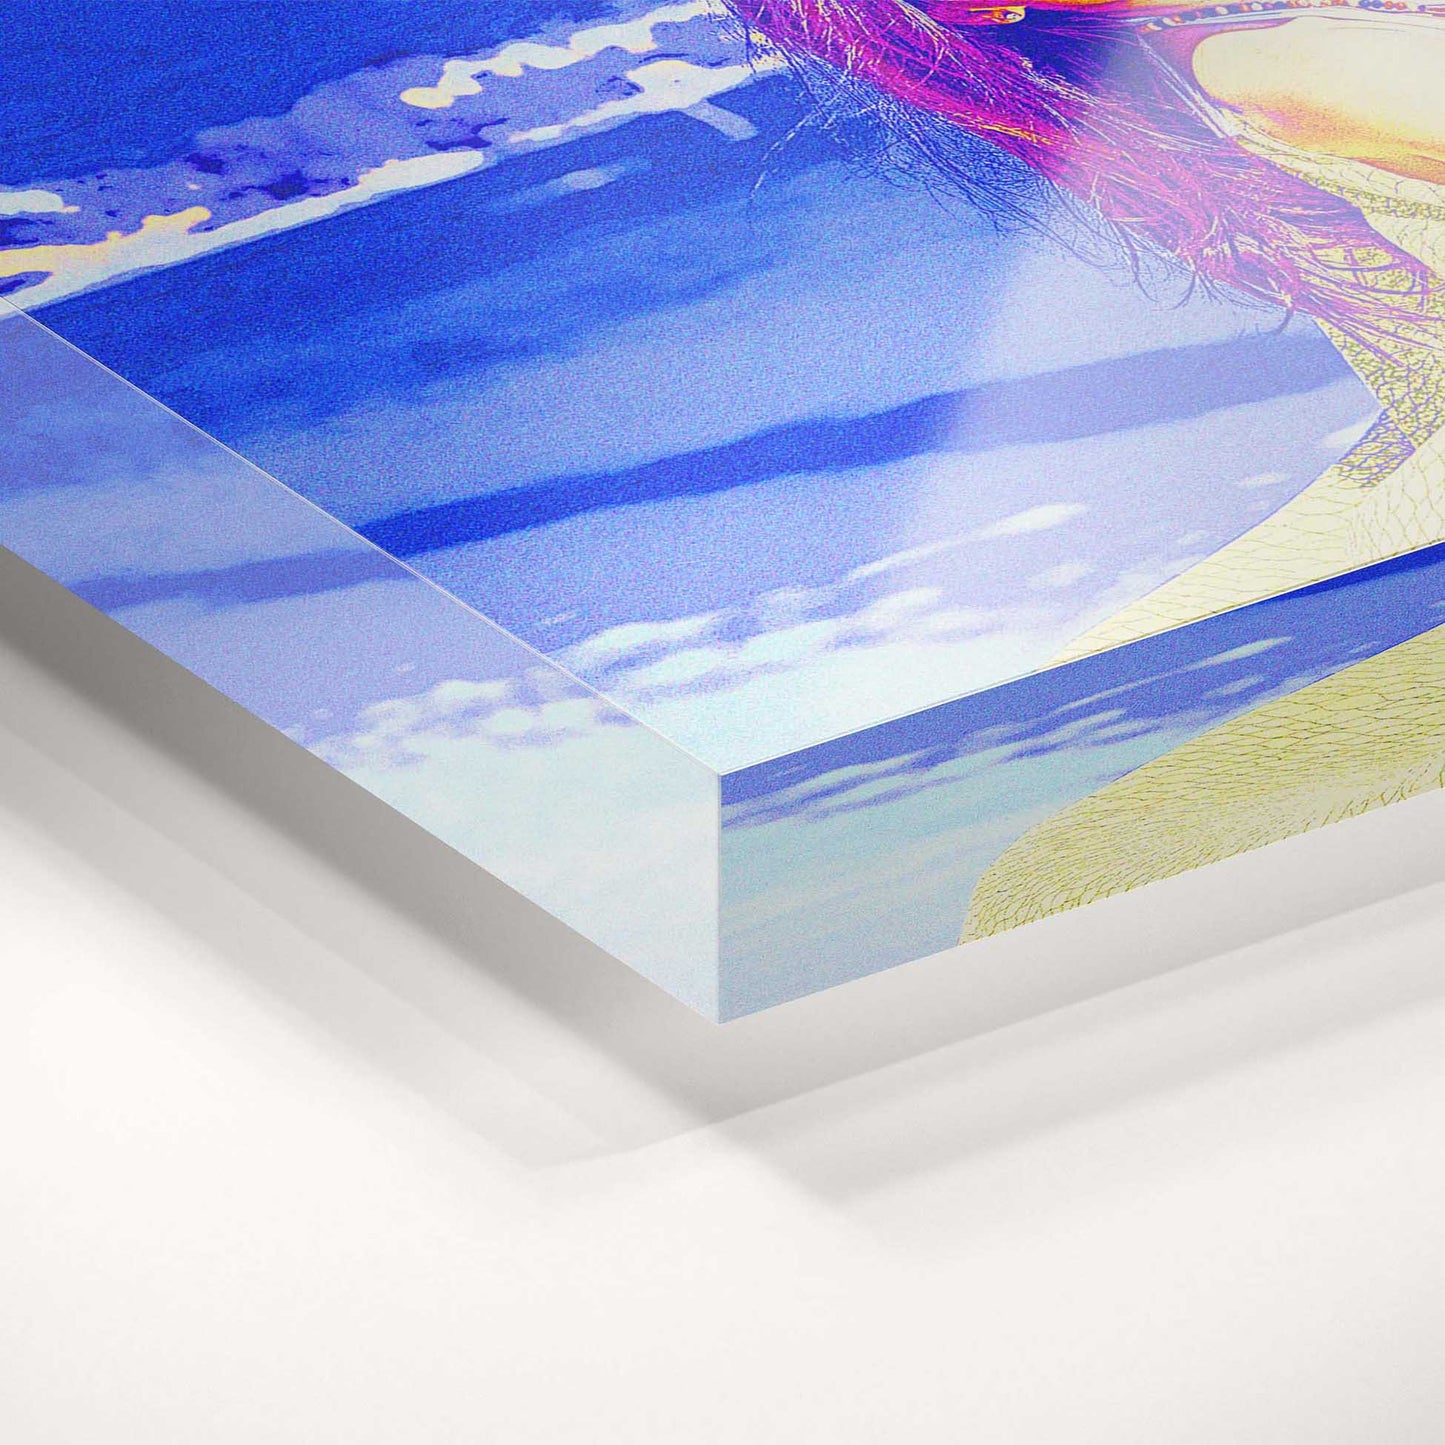  Create a visually striking focal point with this personalised Blue and Purple Posterizer Acrylic Block Photo. The original design, with its vibrant blue and purple hues, makes it a perfect addition to any art collection or as a statement piece for your home decor